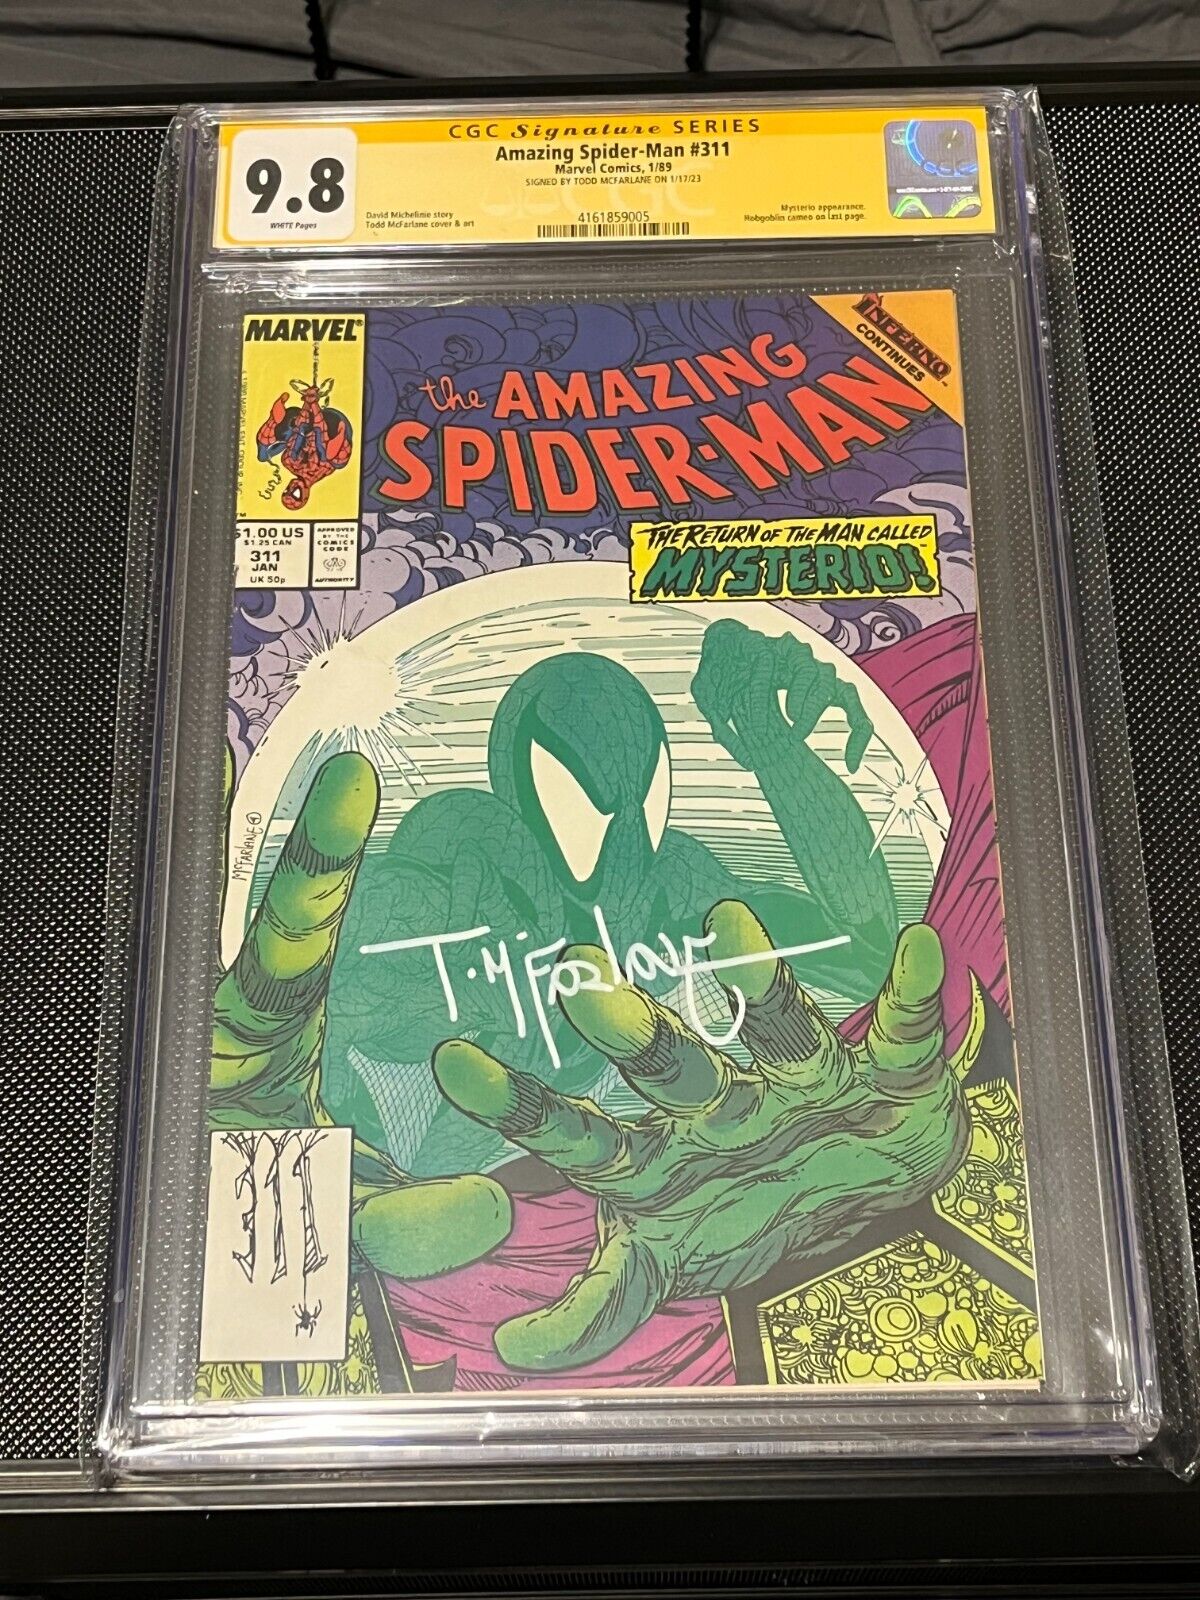 Amazing Spider-Man #311 CGC 9.8 - Signed by Todd McFarlane